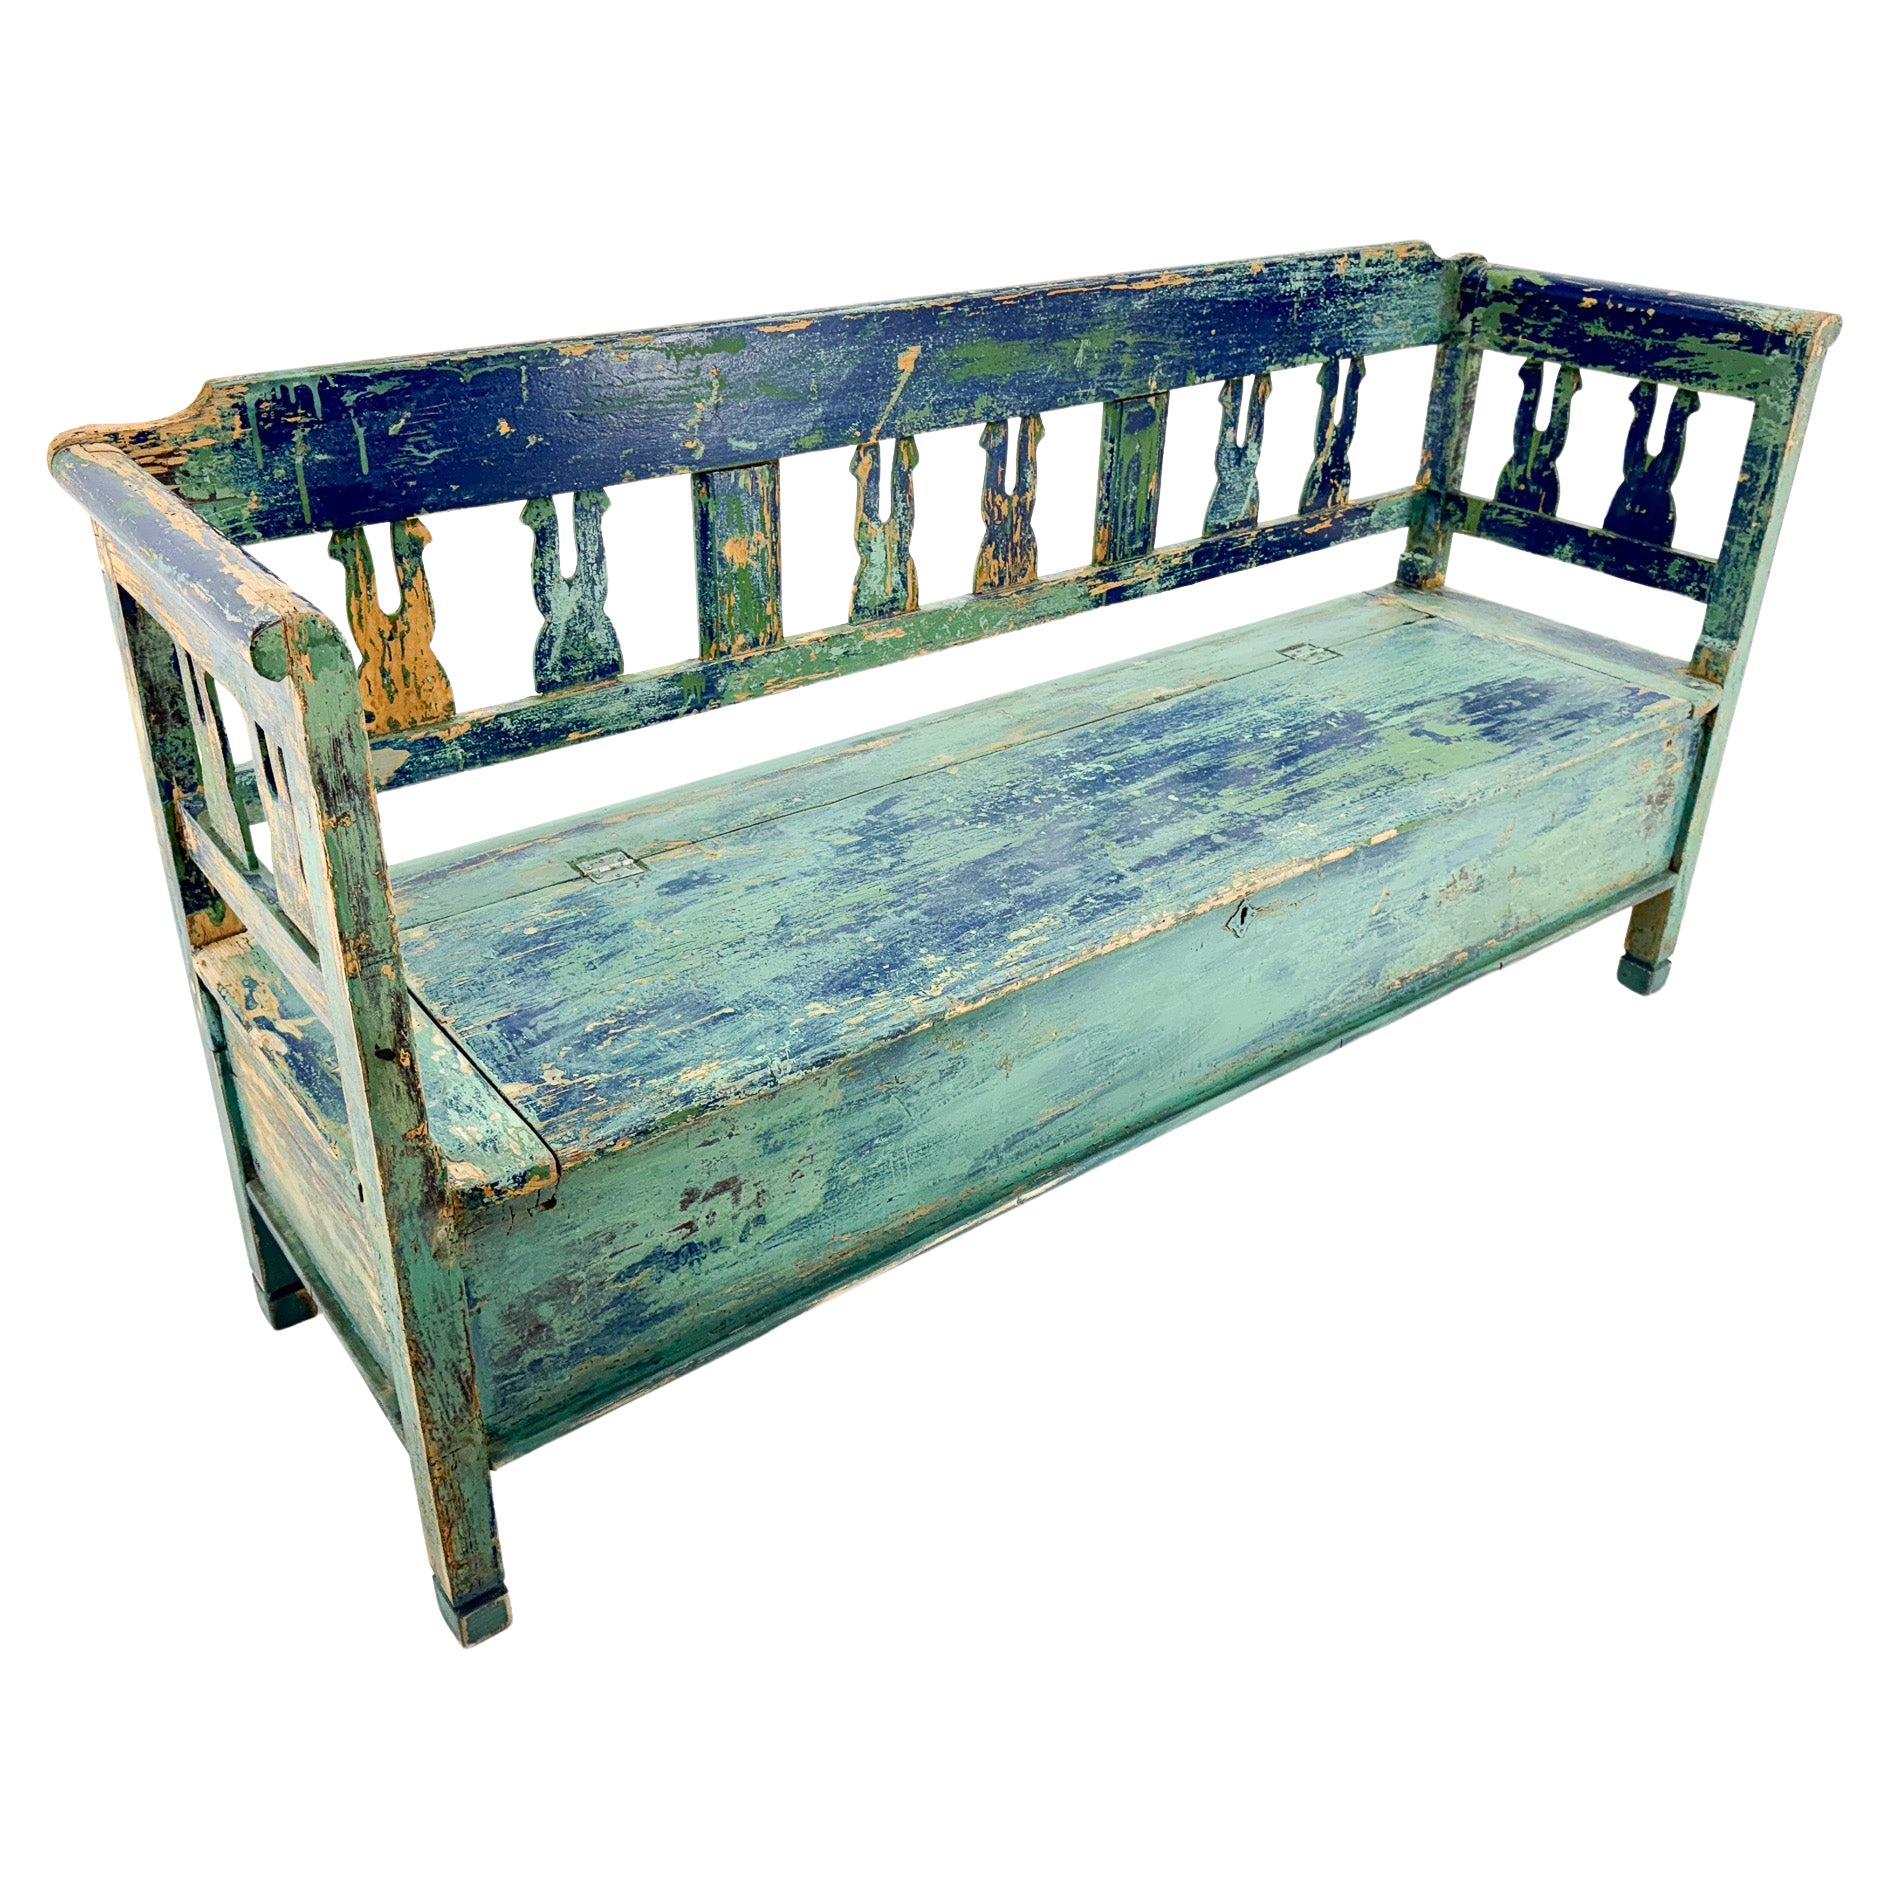 Antique Bench with Storage Space and Beautiful Original Patina